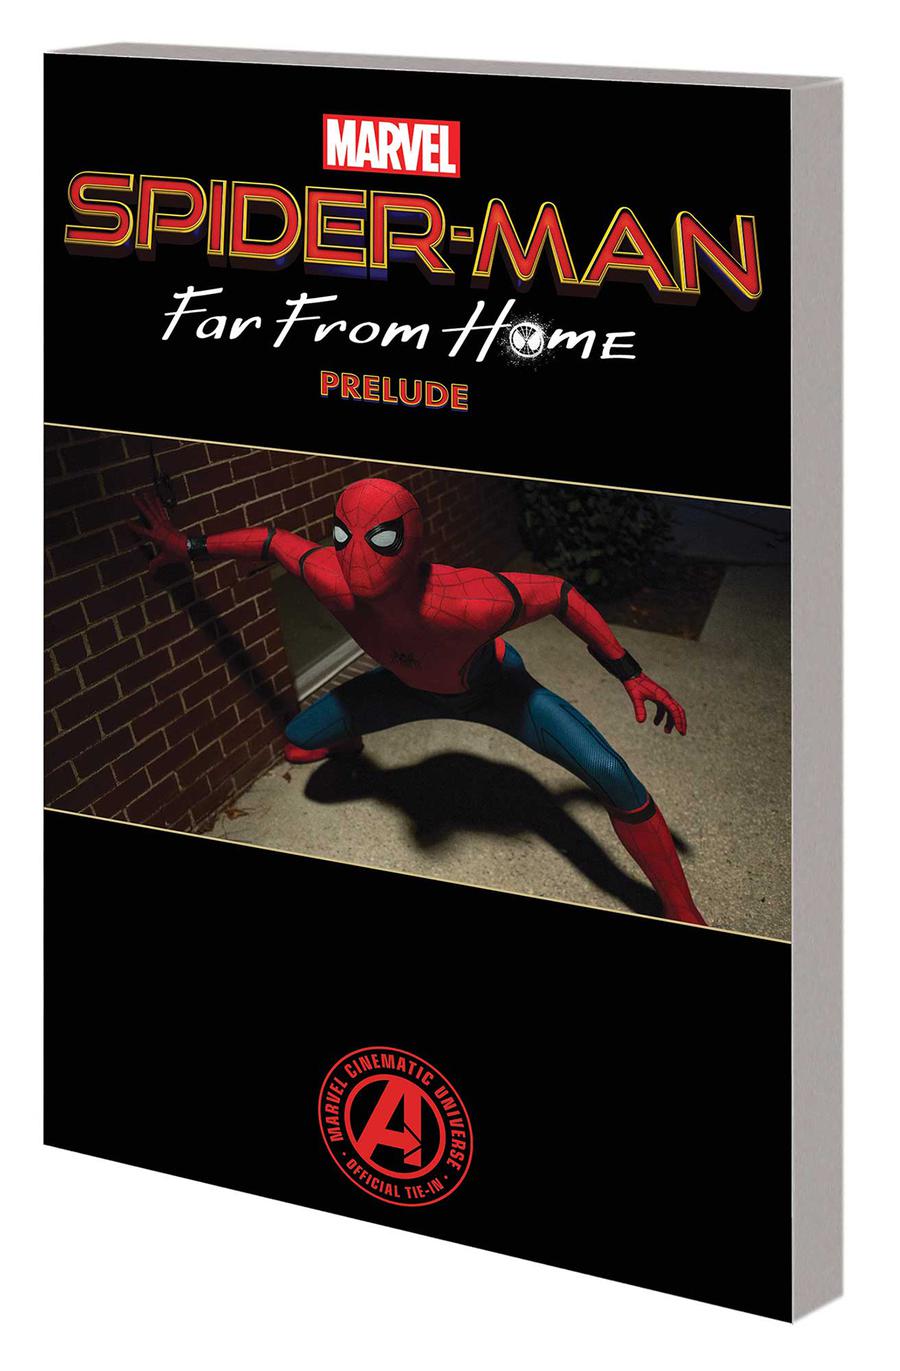 Marvels Spider-Man Far From Home Prelude TP